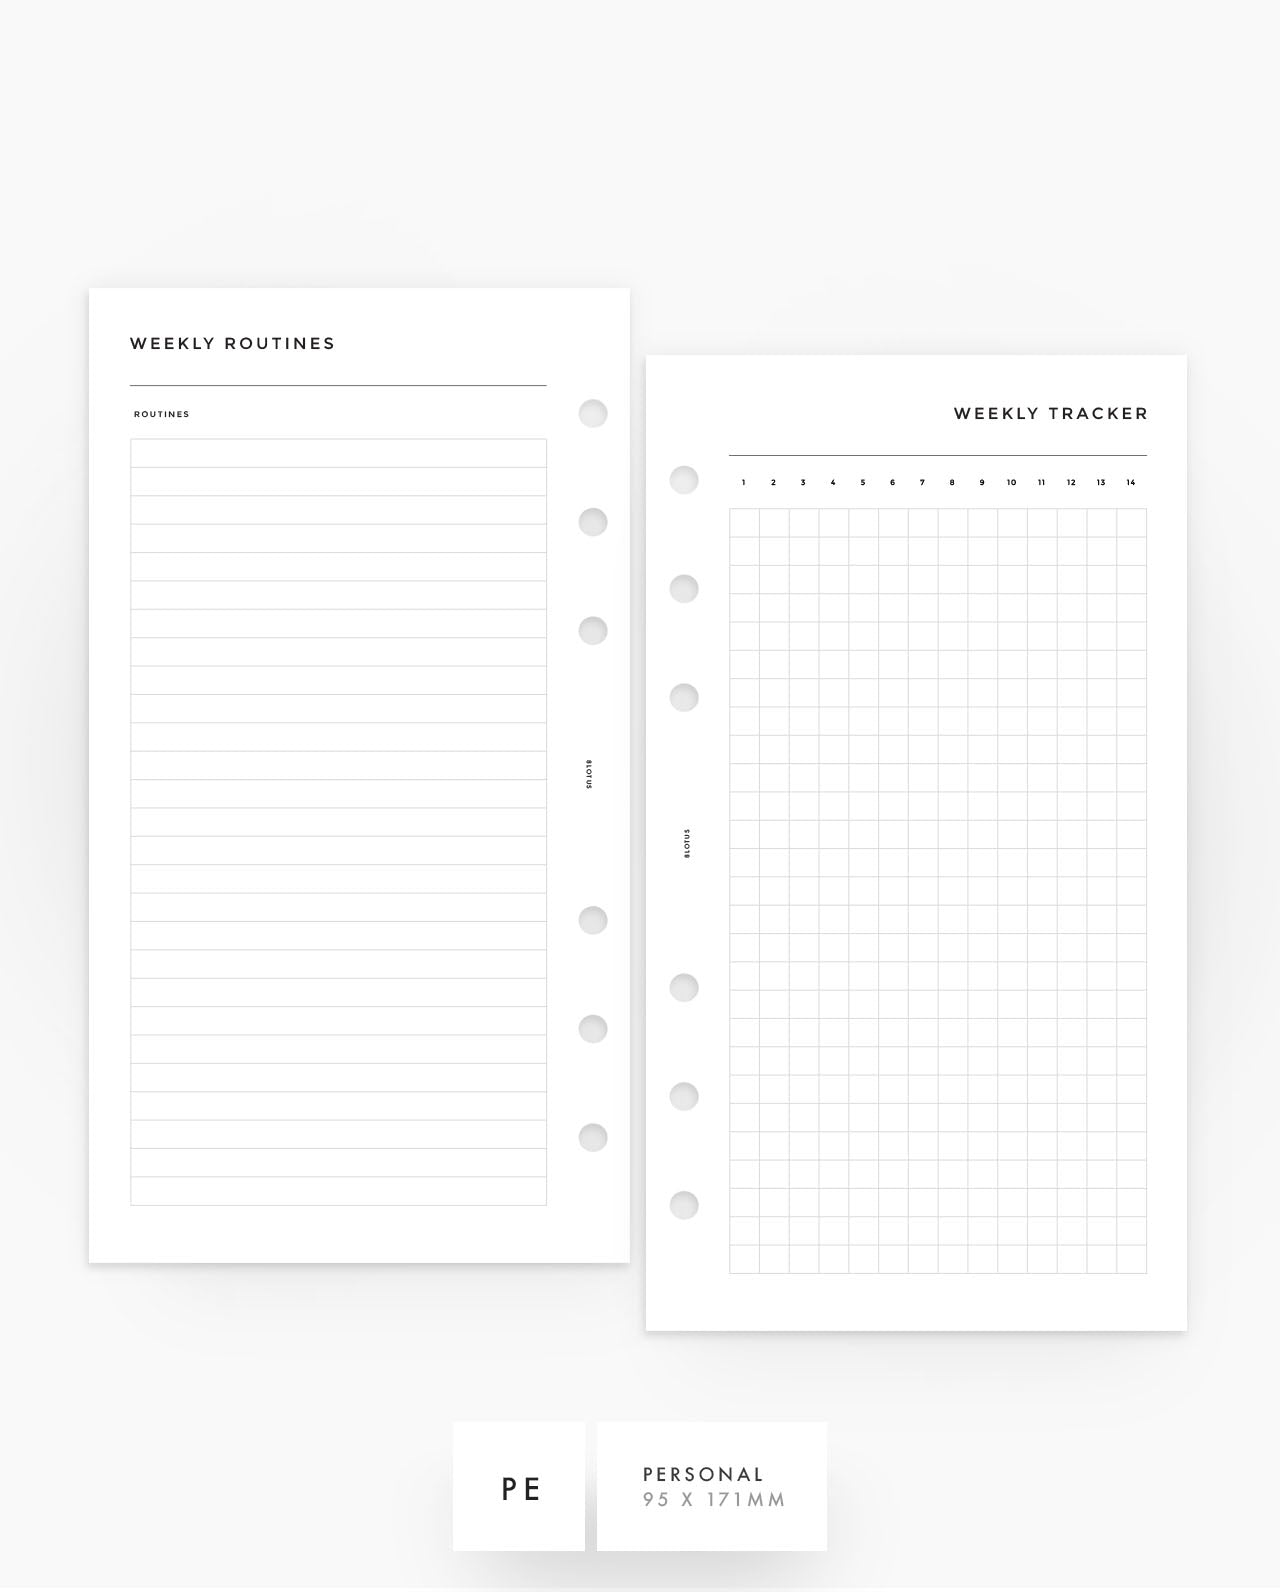 MN188 - Yearly Routine Bundle - Annual, Monthly & Weekly Trackers